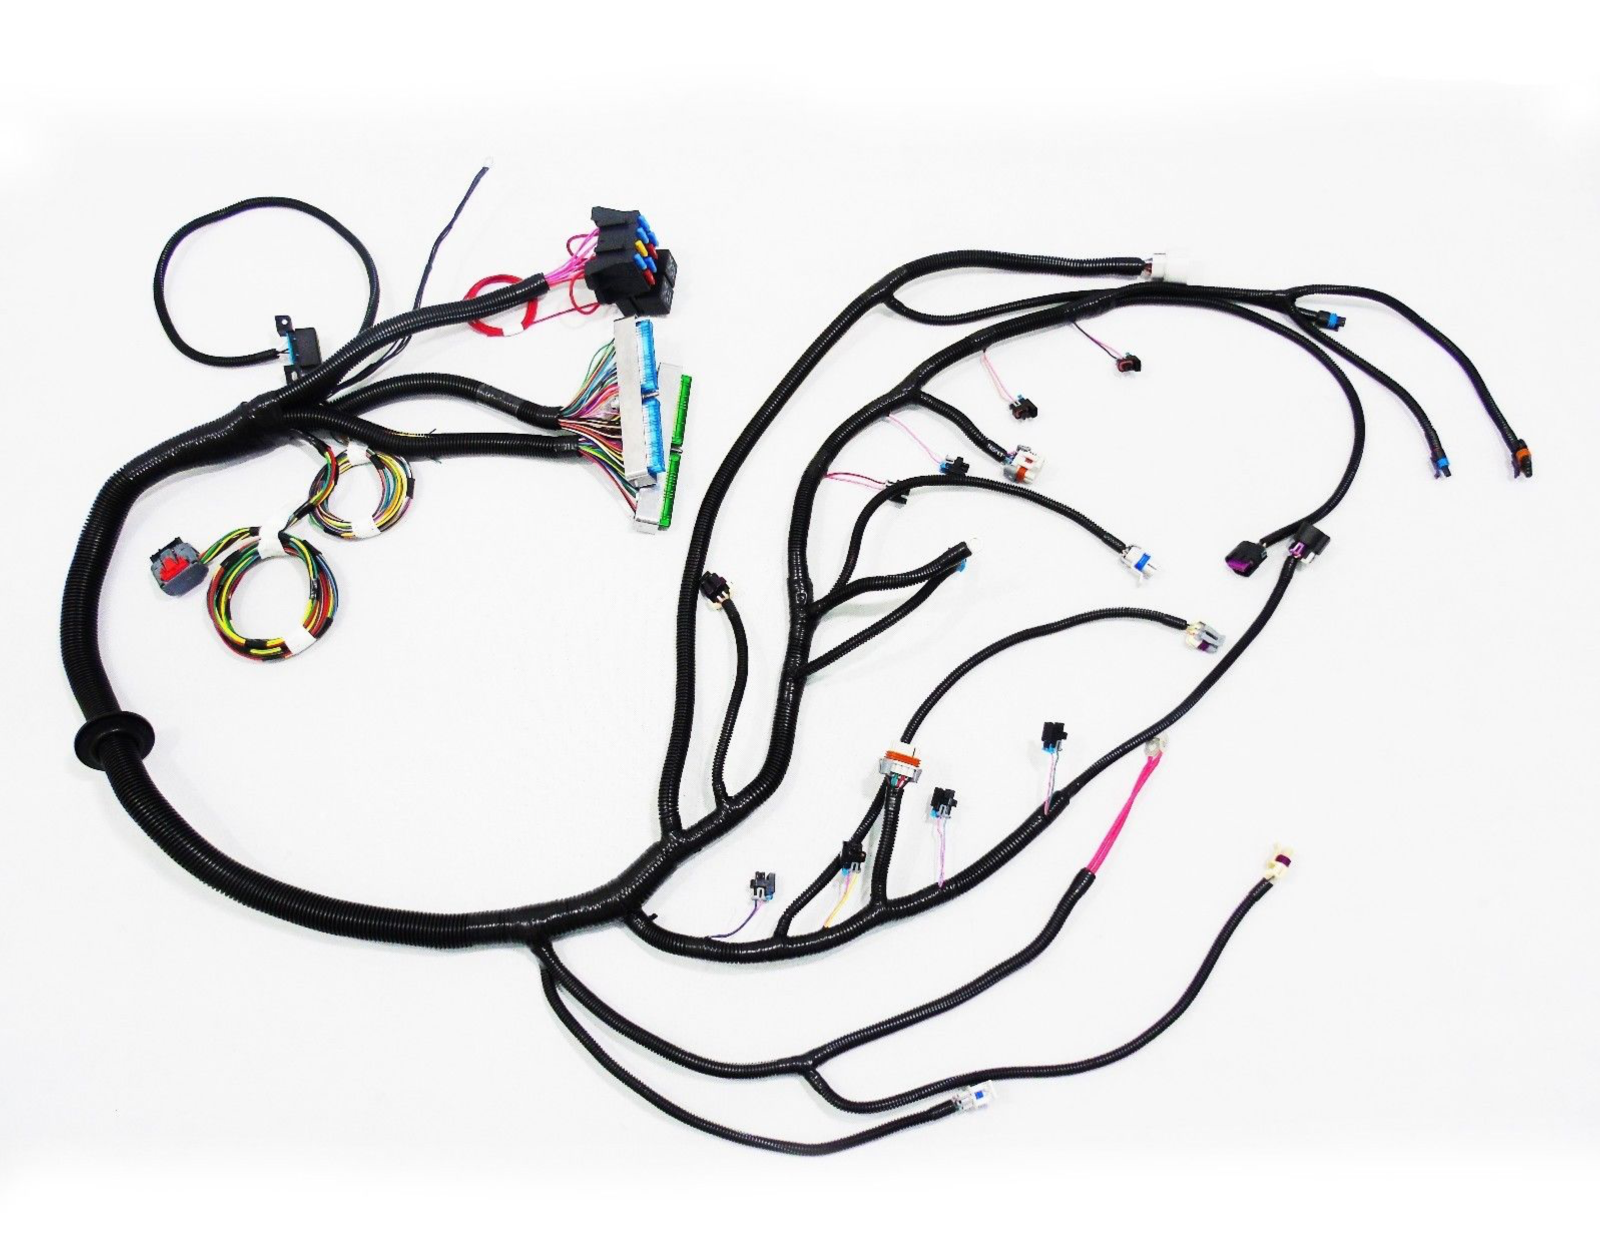 Engine Wiring Harness, Automotive Stand Alone Wire Harness 4L80E DBC Drive  by Wire for LS Engine 4.8 5.3 6.0 Pipes/Wire Harnesses, Coil Lead Wires -   Canada